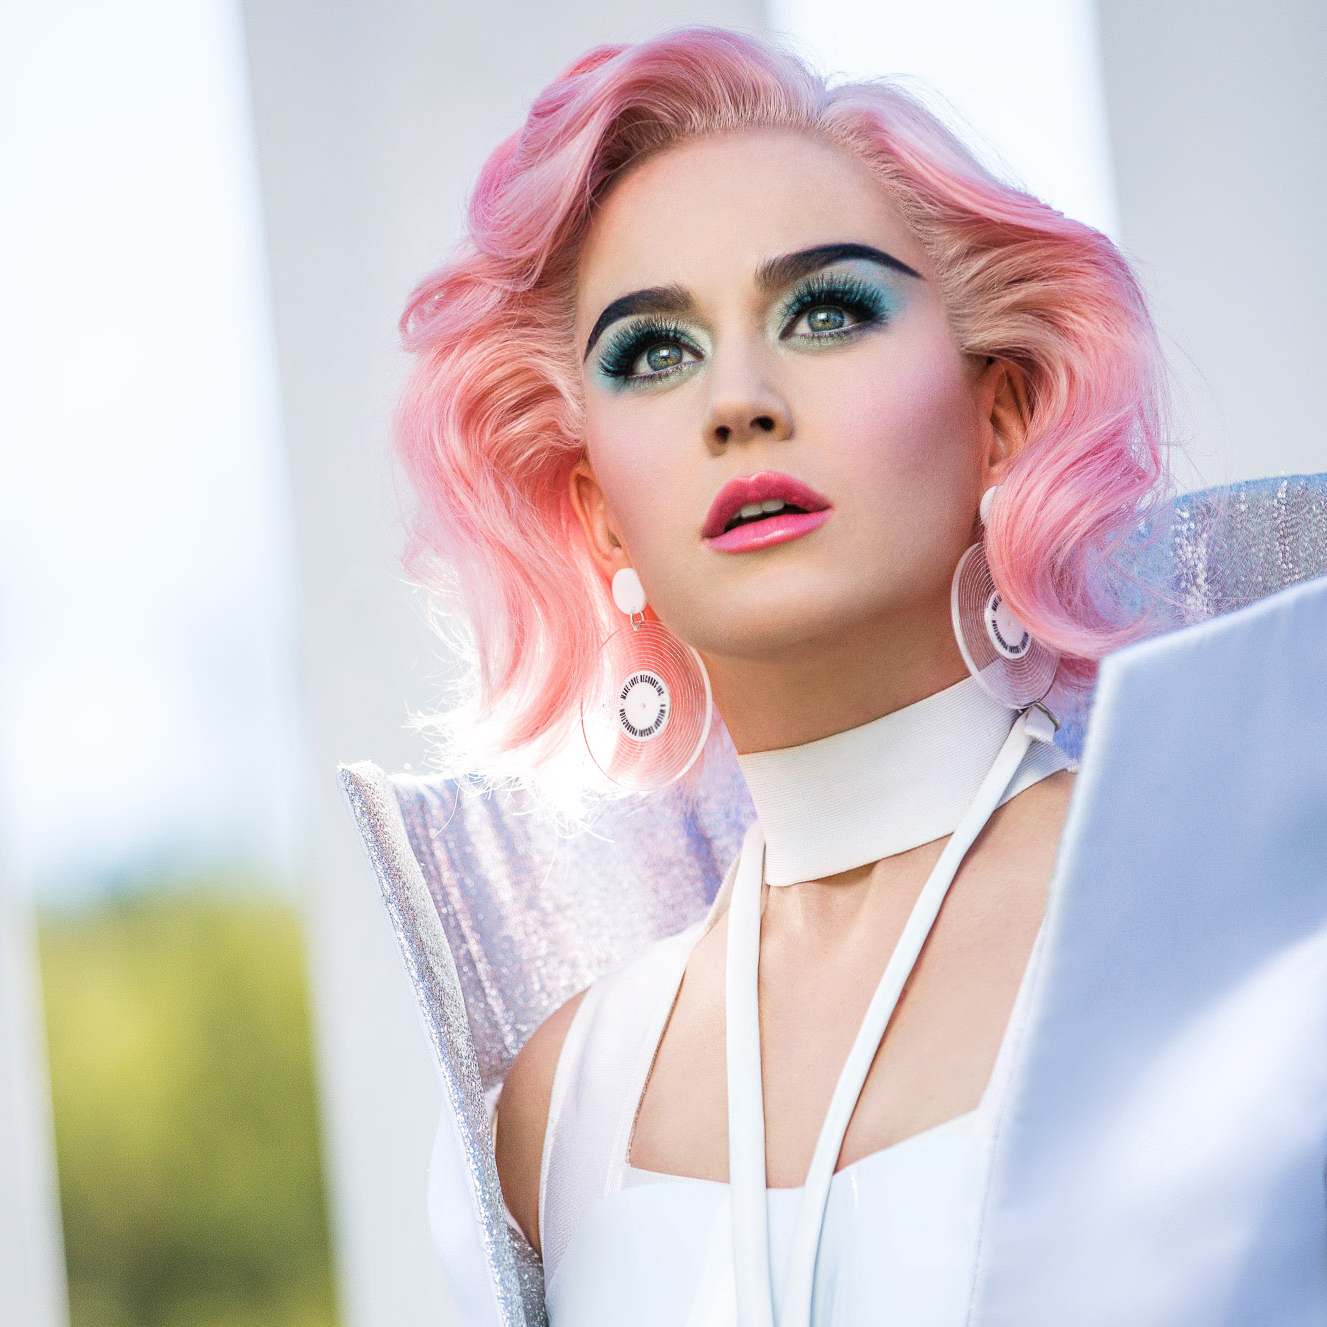 Katy Perry S Chained To The Rhythm Enjoys Chart